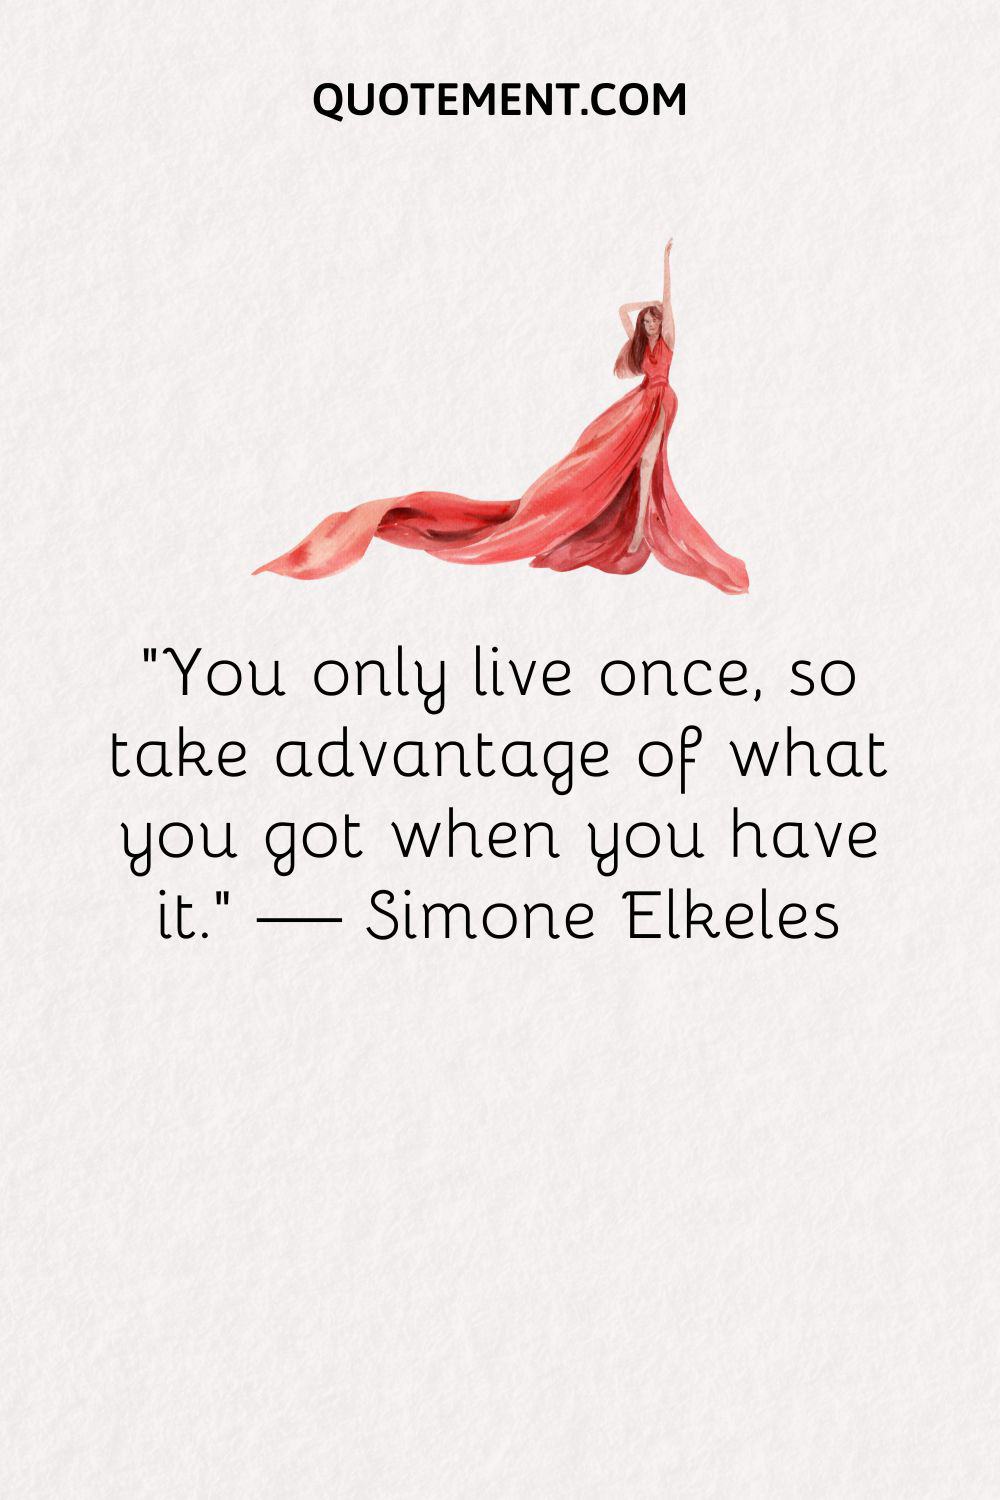 “You only live once, so take advantage of what you got when you have it.” — Simone Elkeles